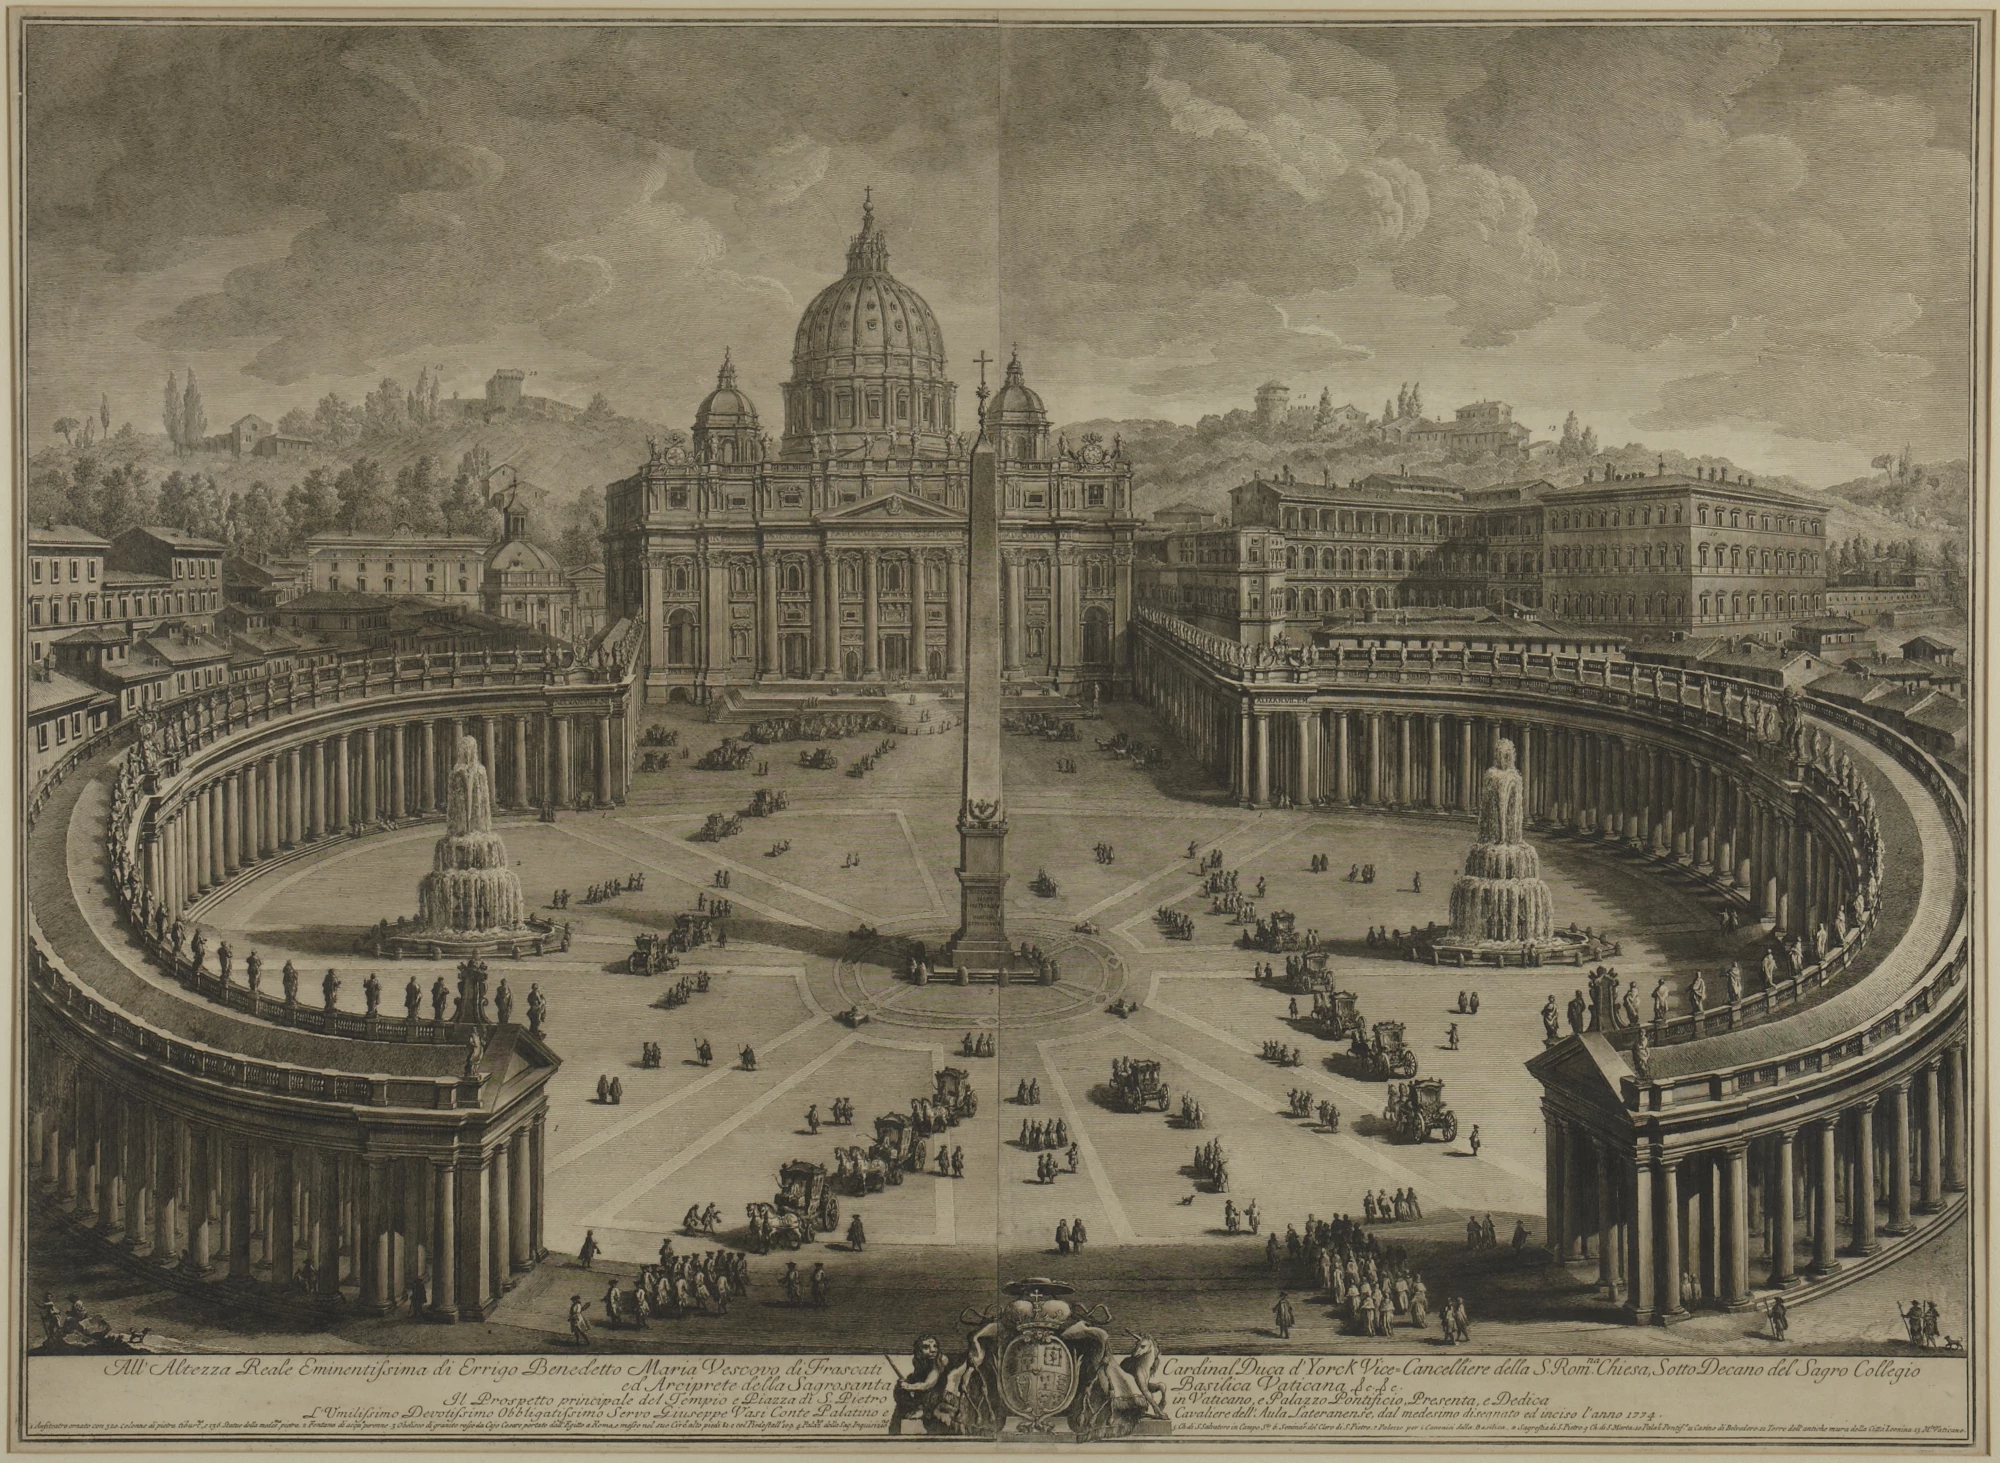 View of St. Peter's and the Piazza, Giovanni Battista Piranesi